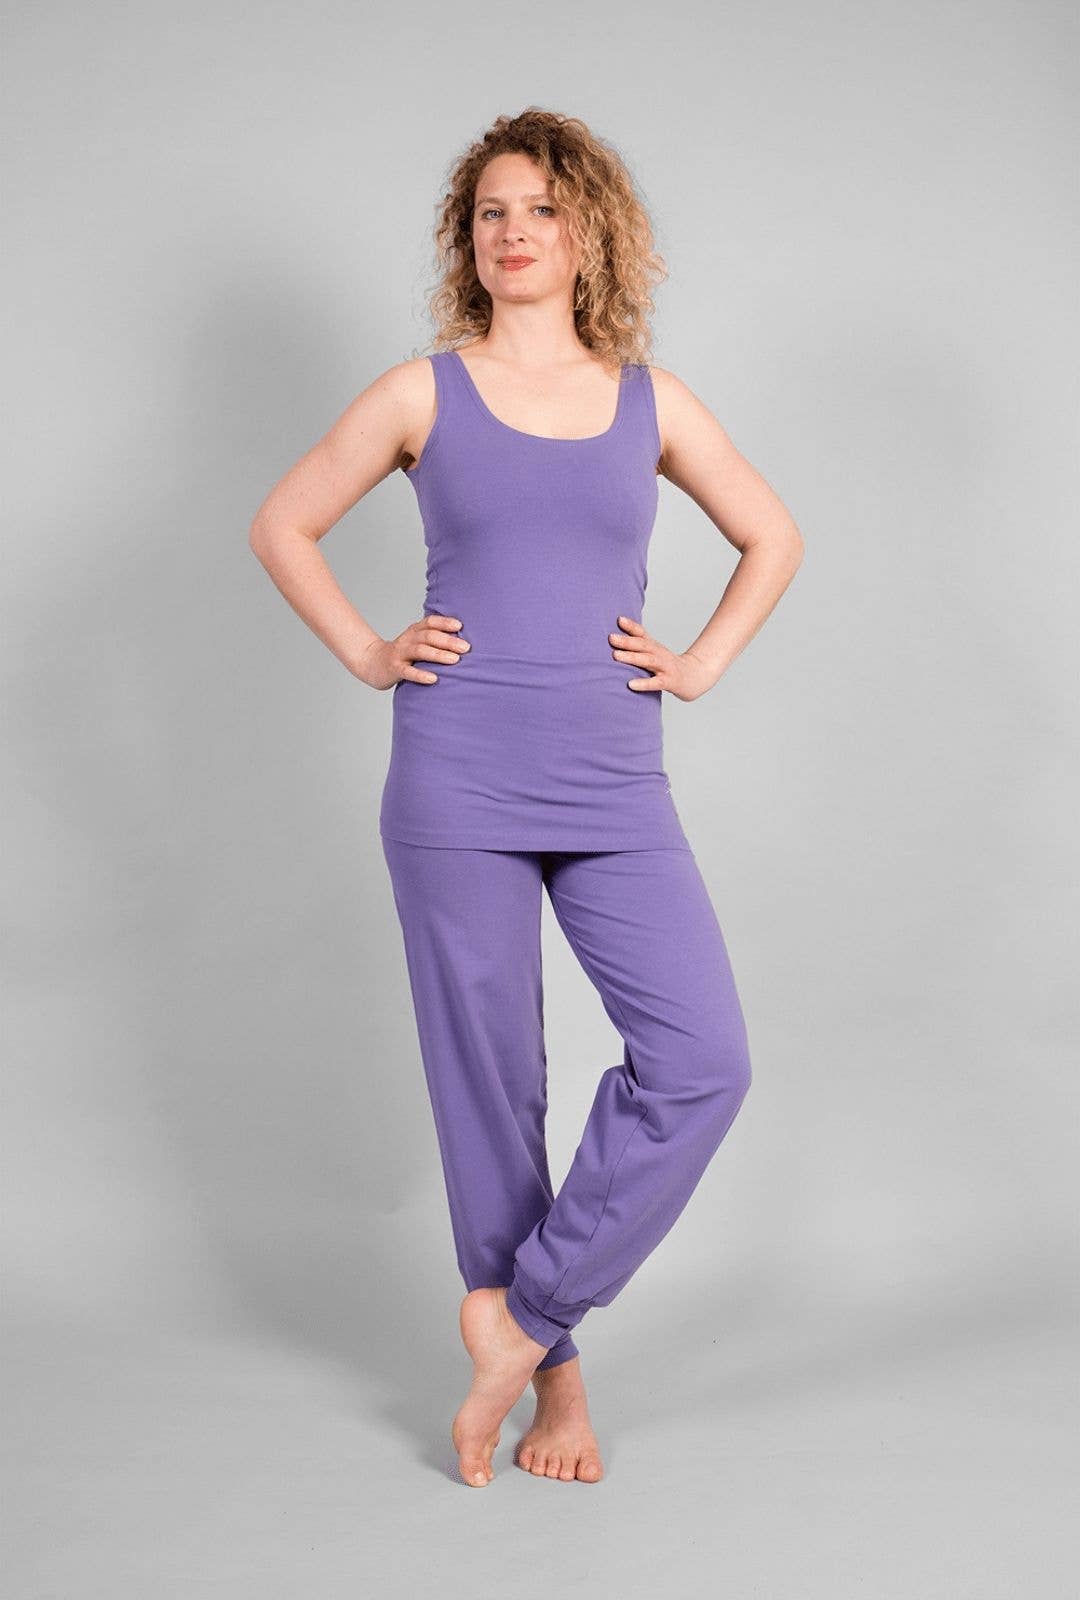 Pink Yoga Clothes For Women